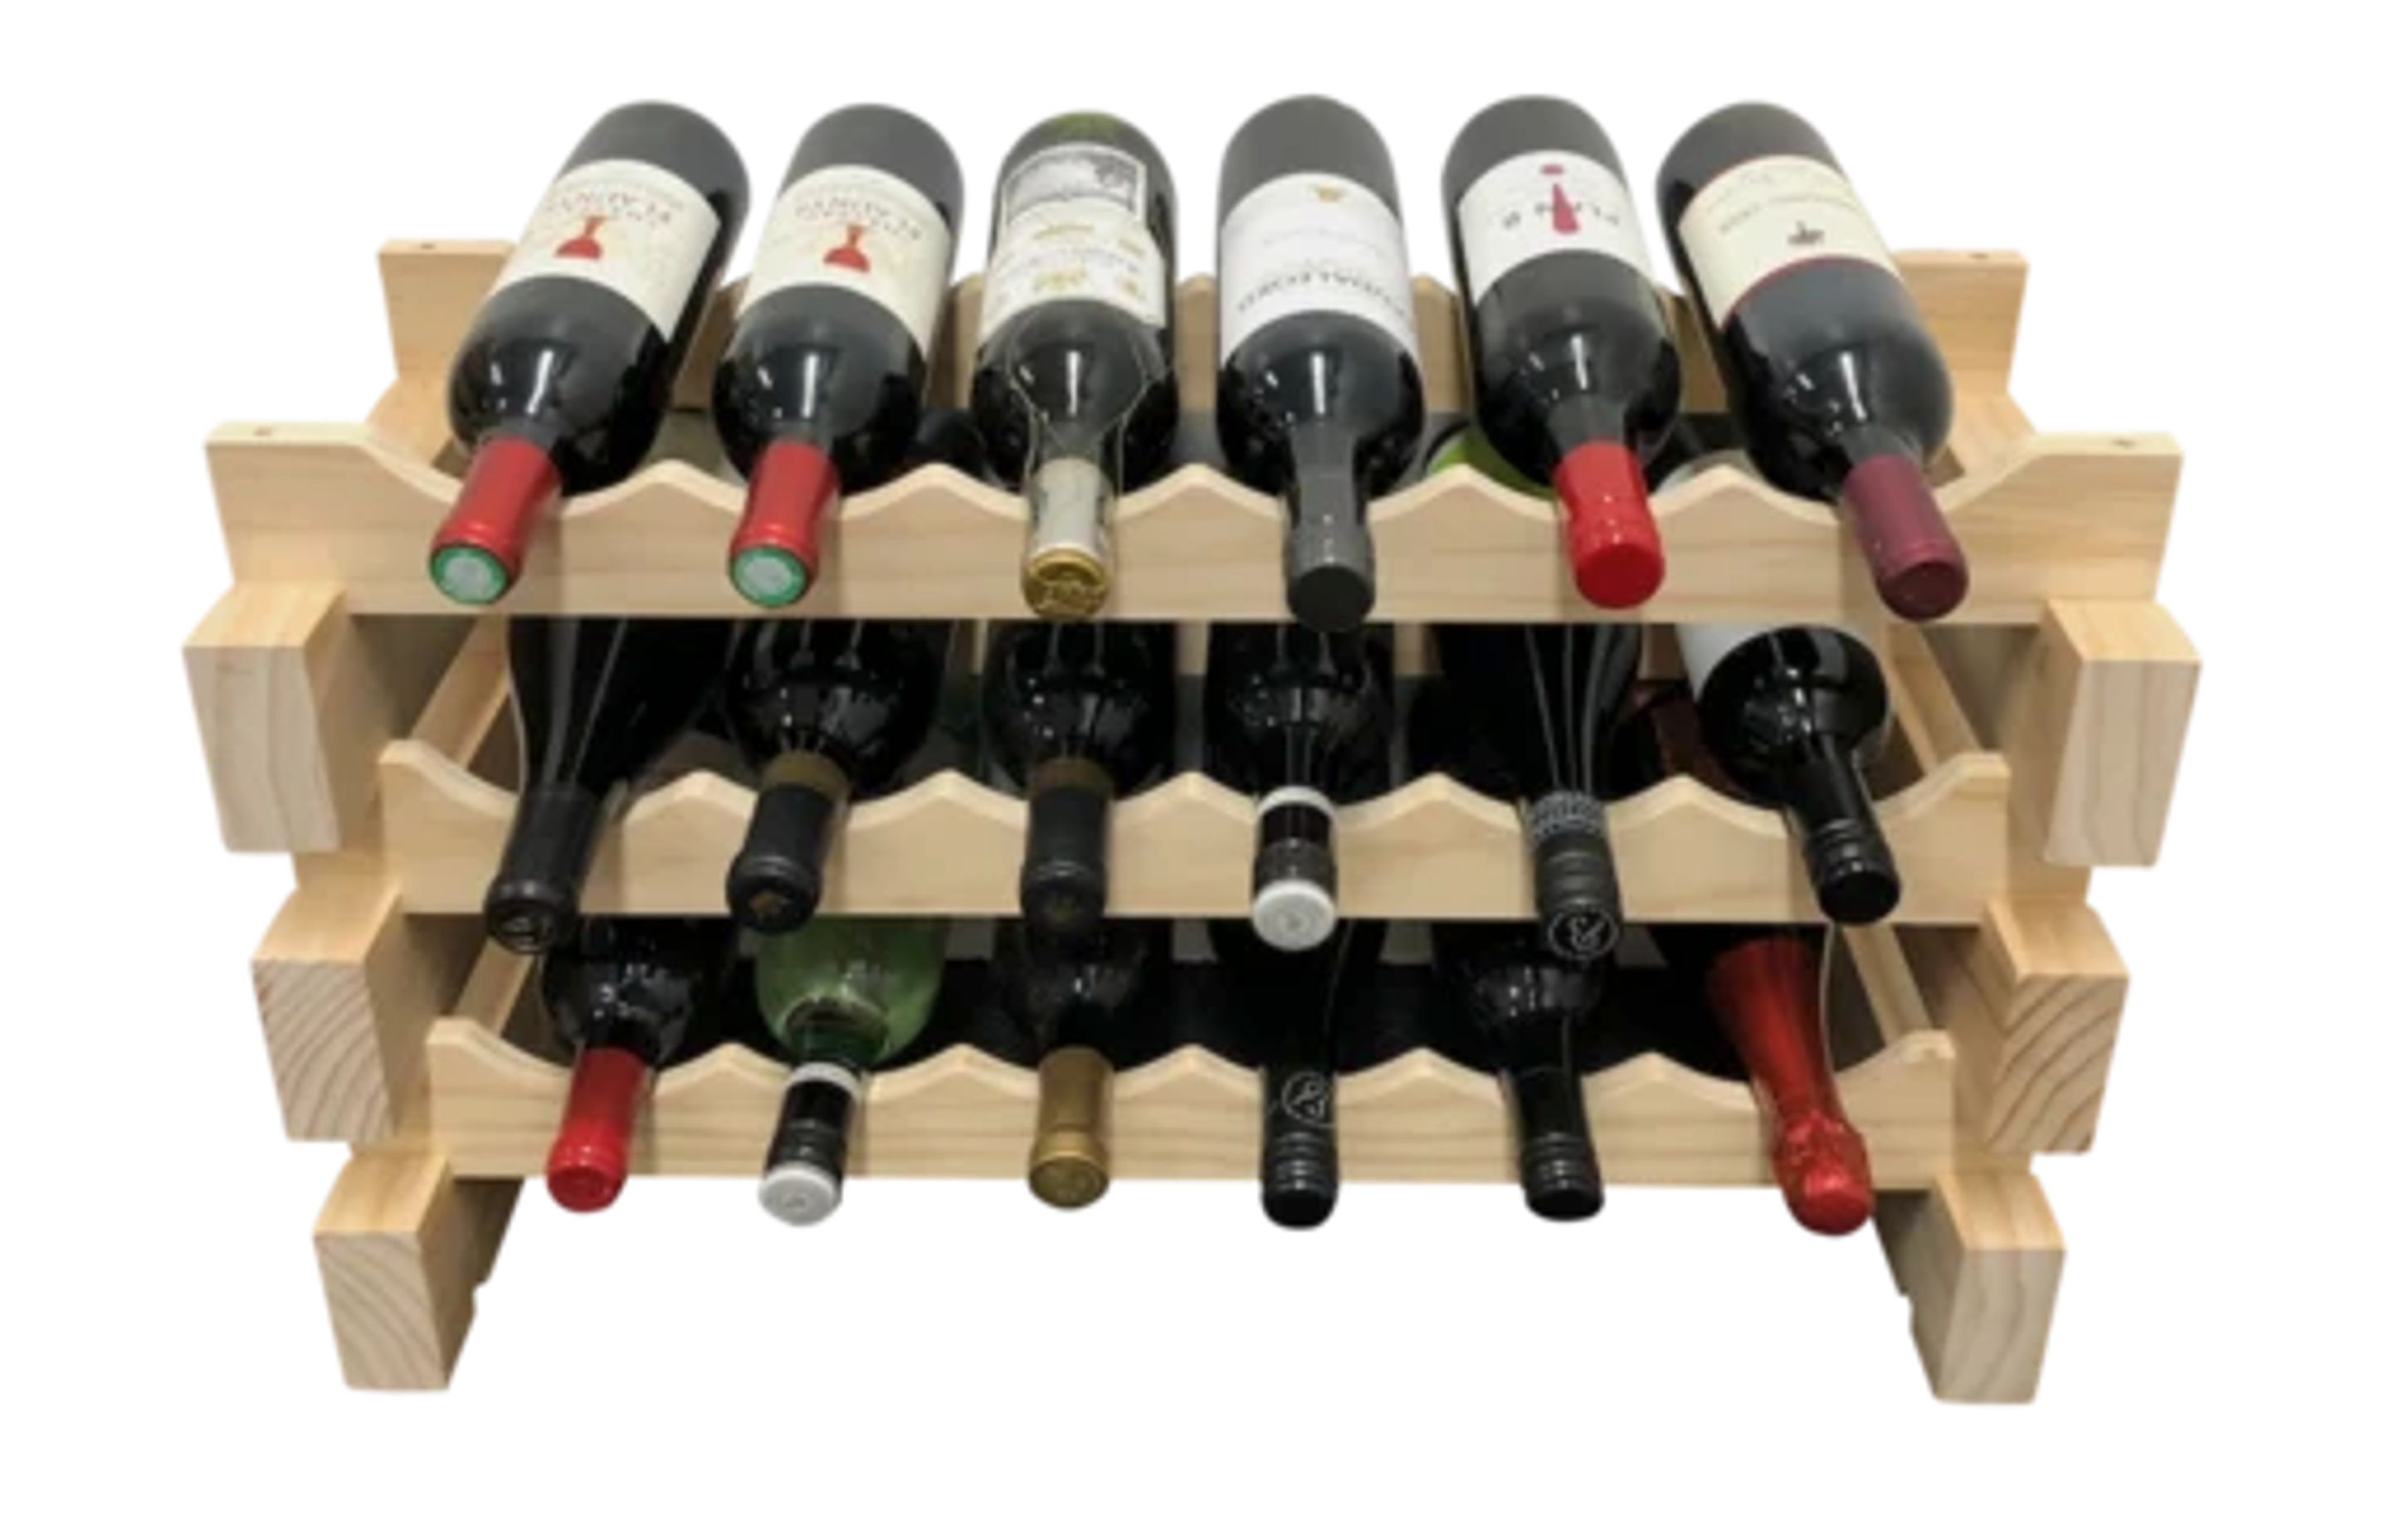 7 Small Wine Racks that Are Perfect For When You Have Limited Space